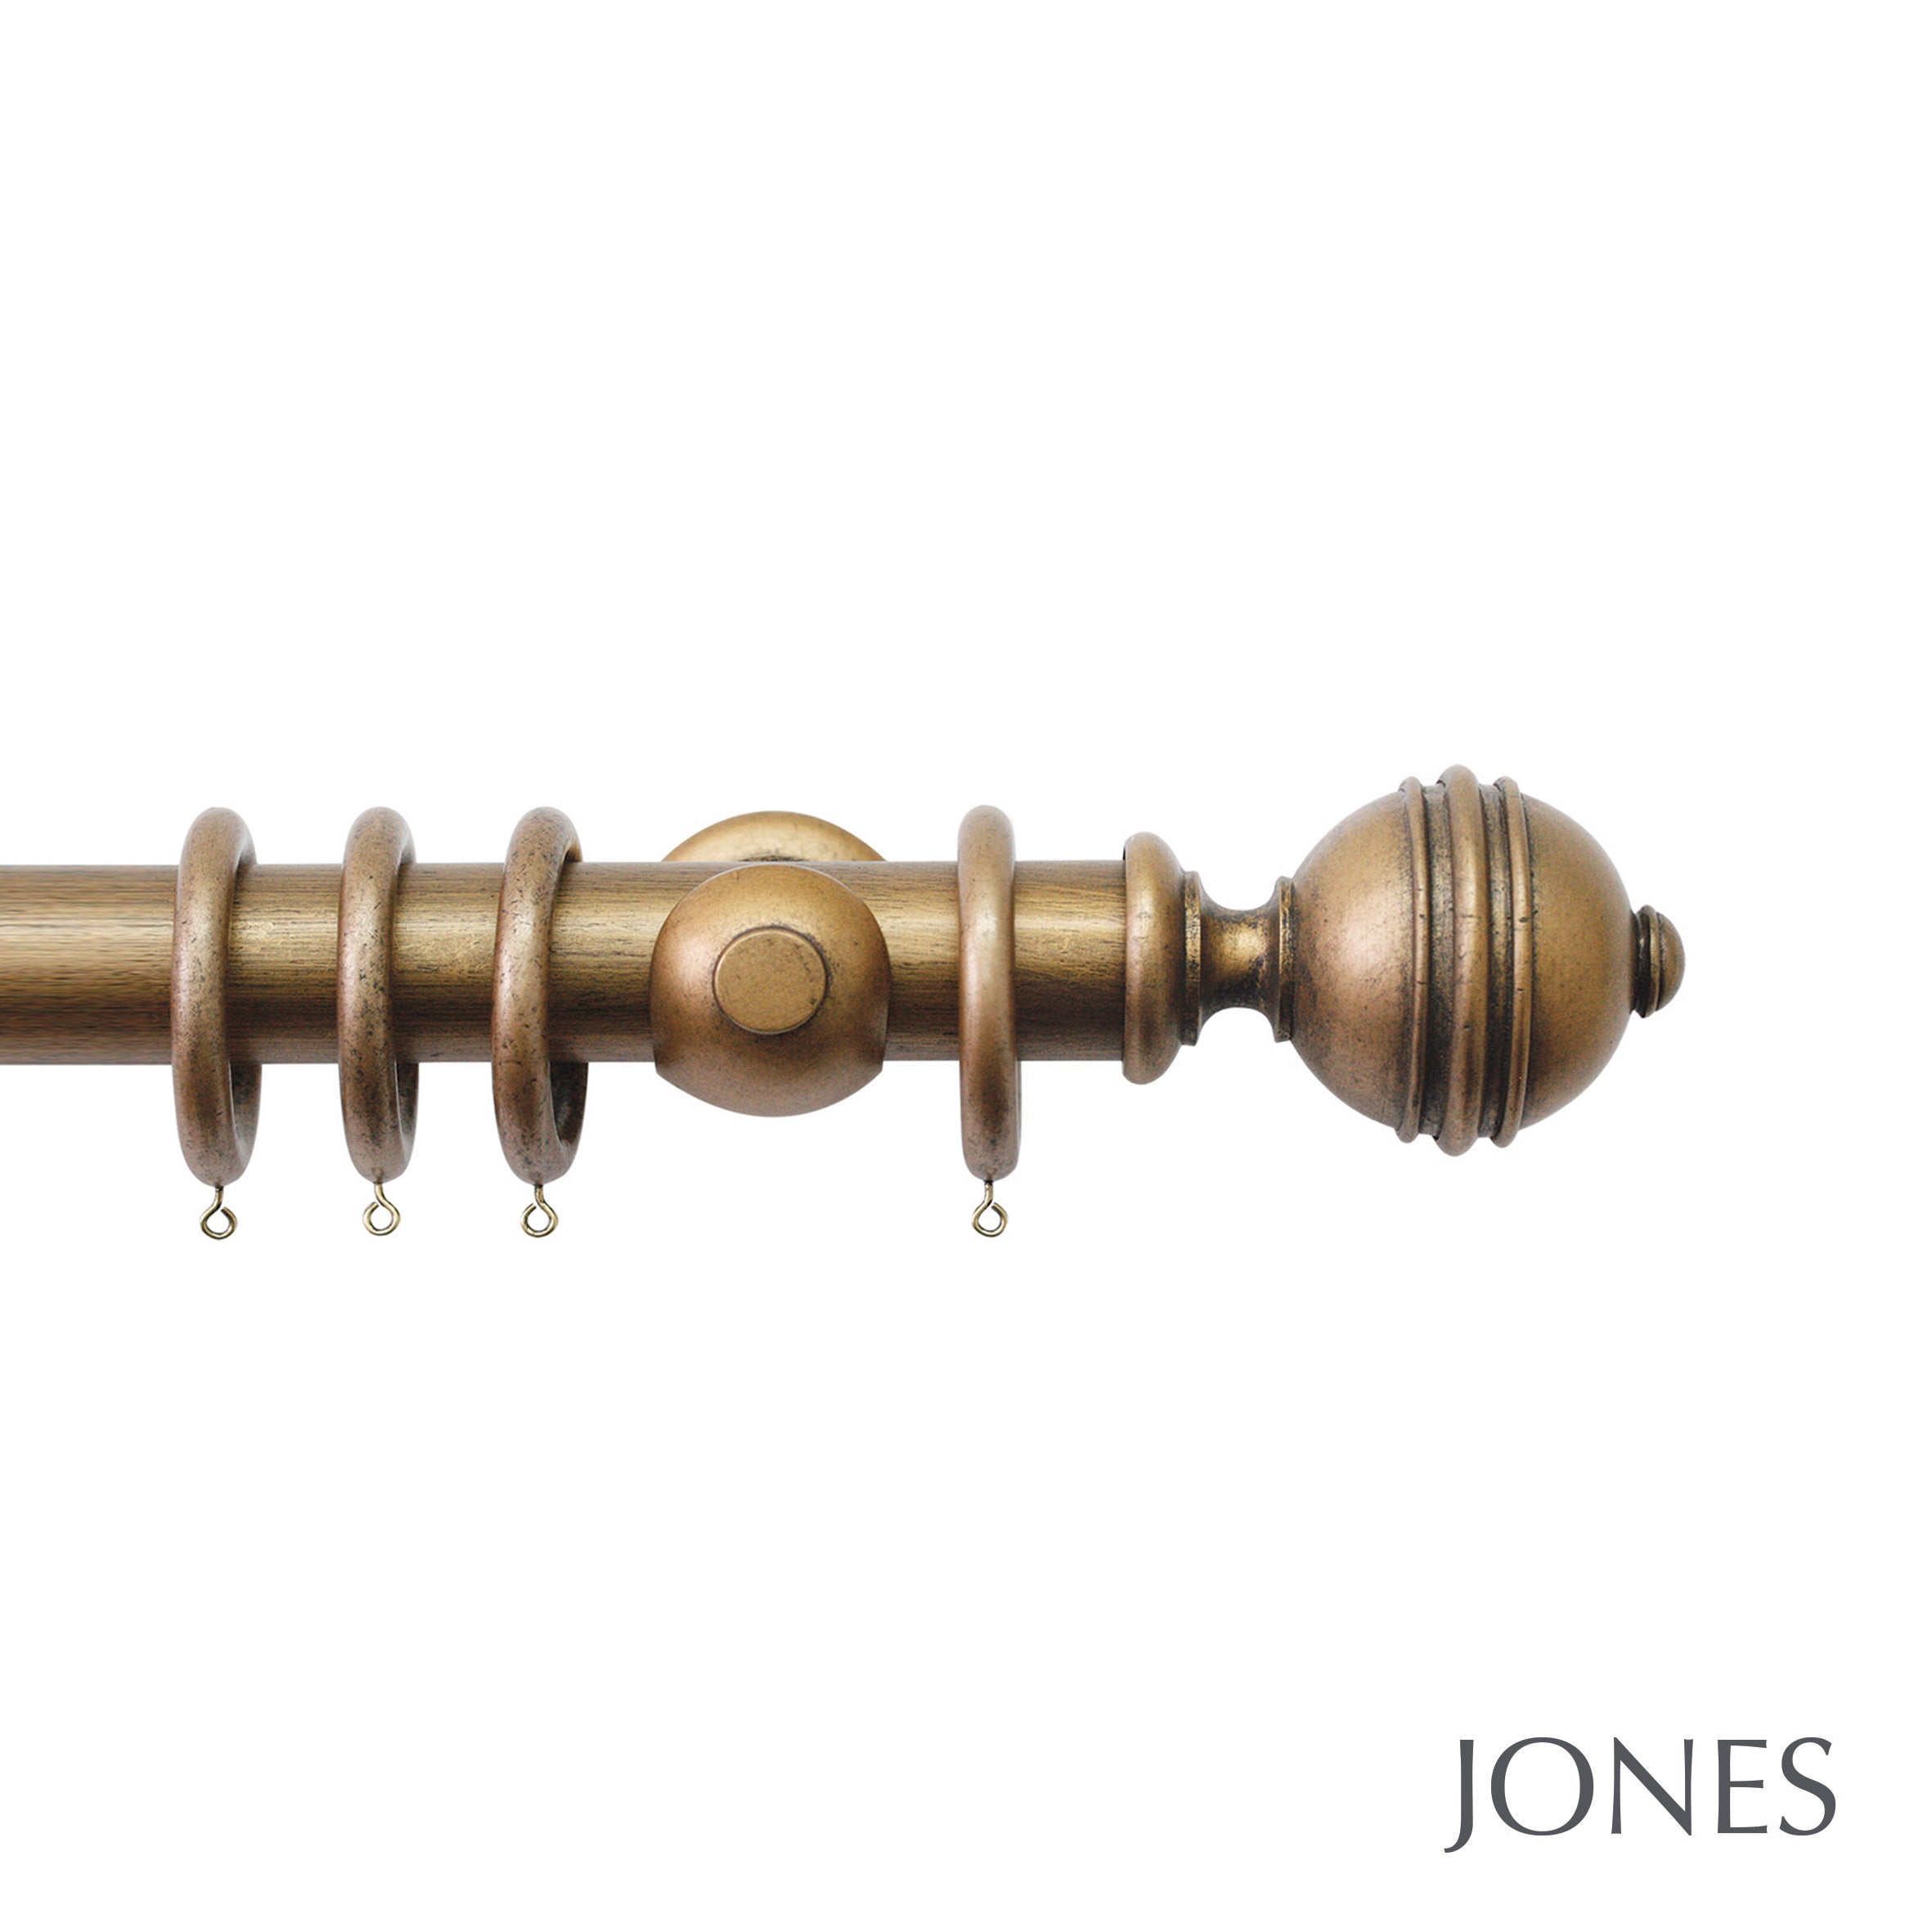 Jones Interiors Florentine Ribbed Ball Finial Curtain Pole Set in Antique Gold